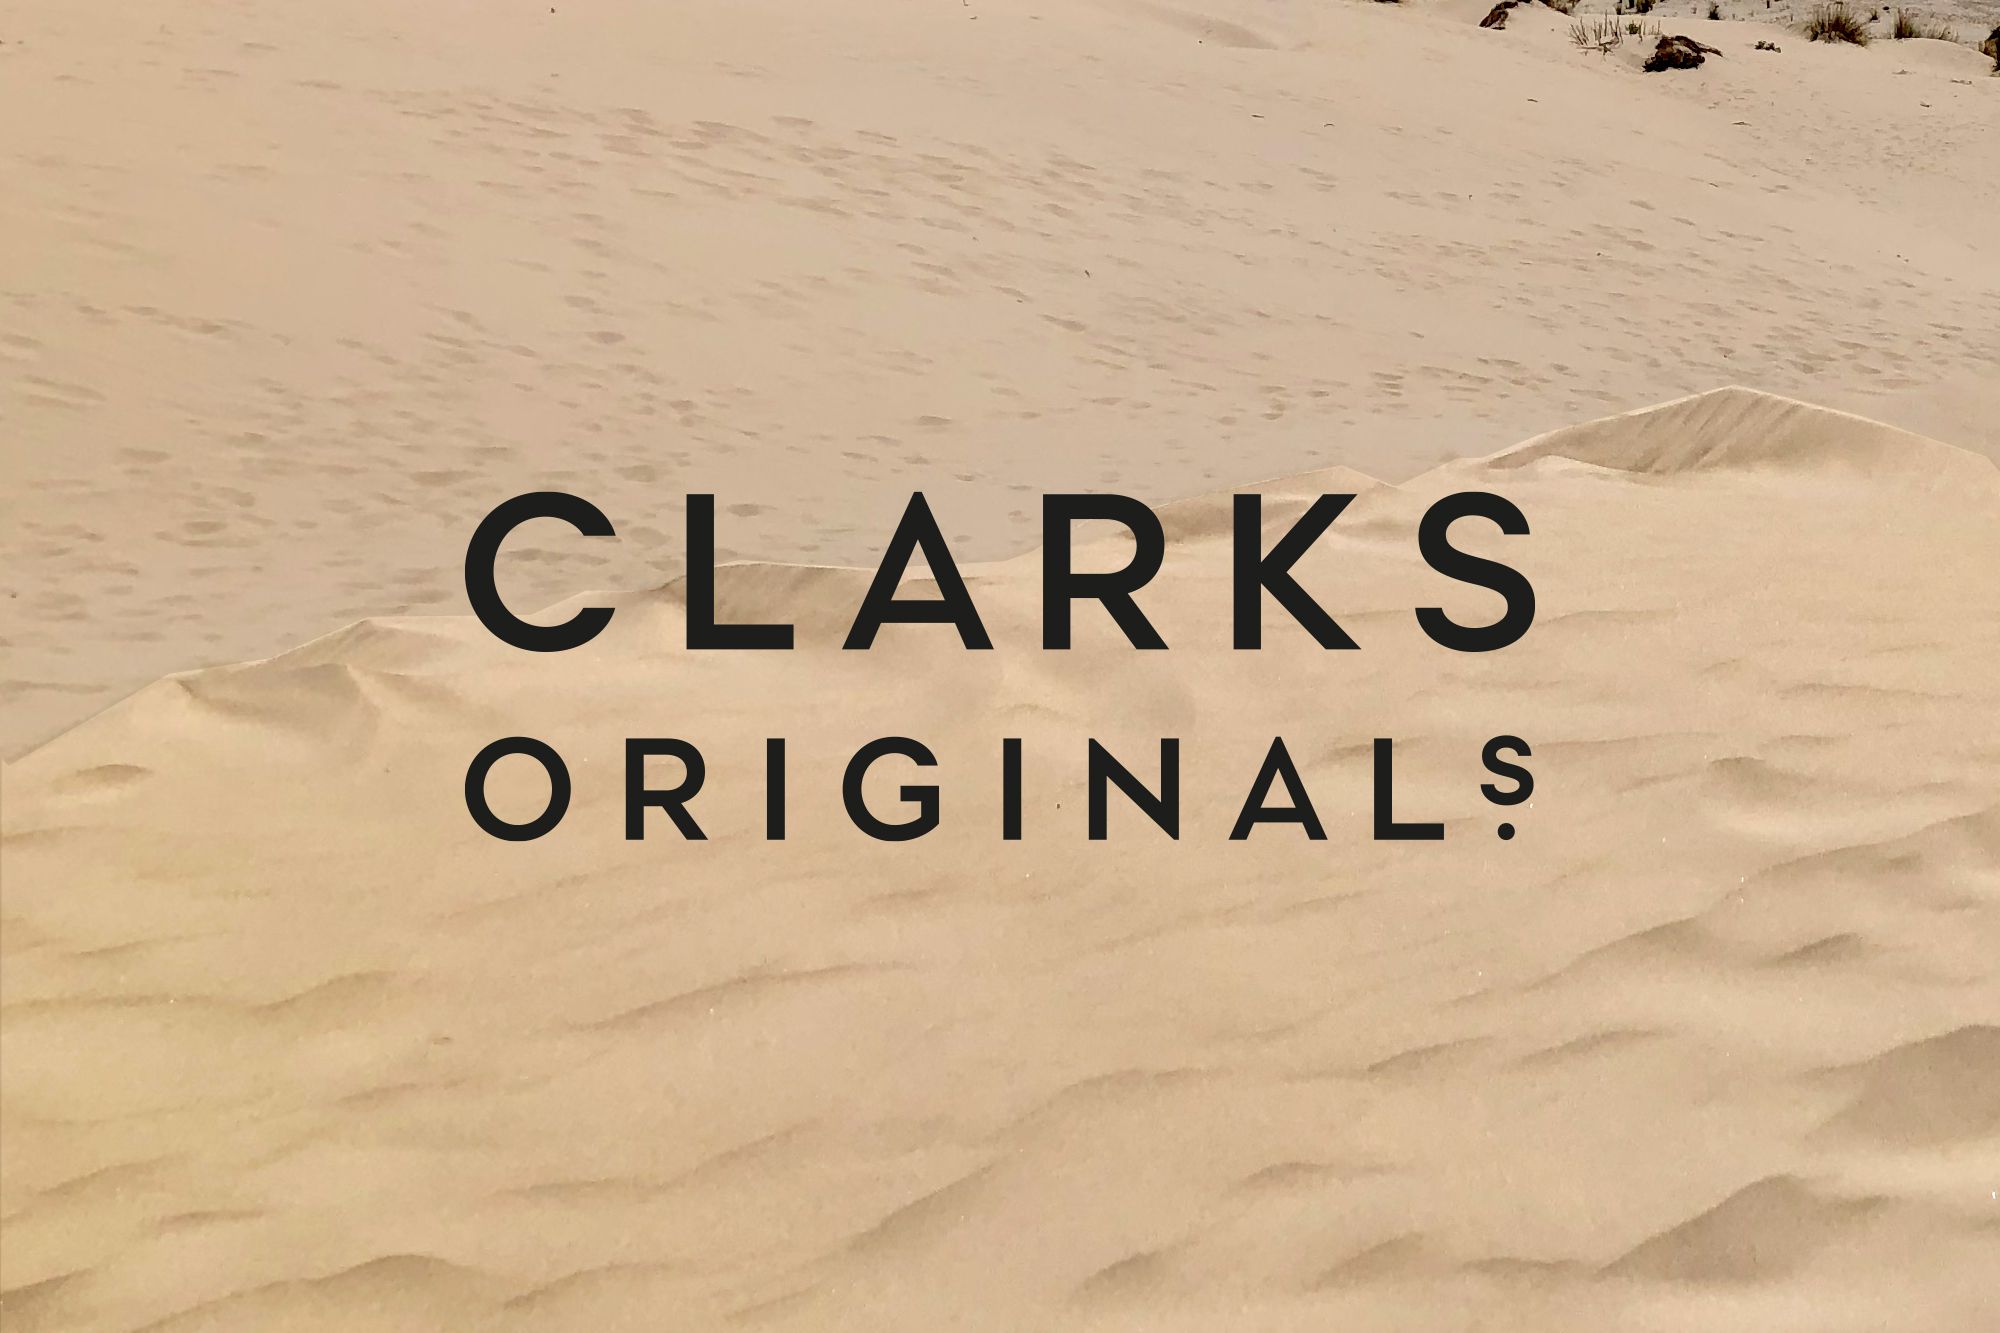 CLARKS ORIGINALS Story and anecdotes of a brand that made history, by Andrea Bolloni